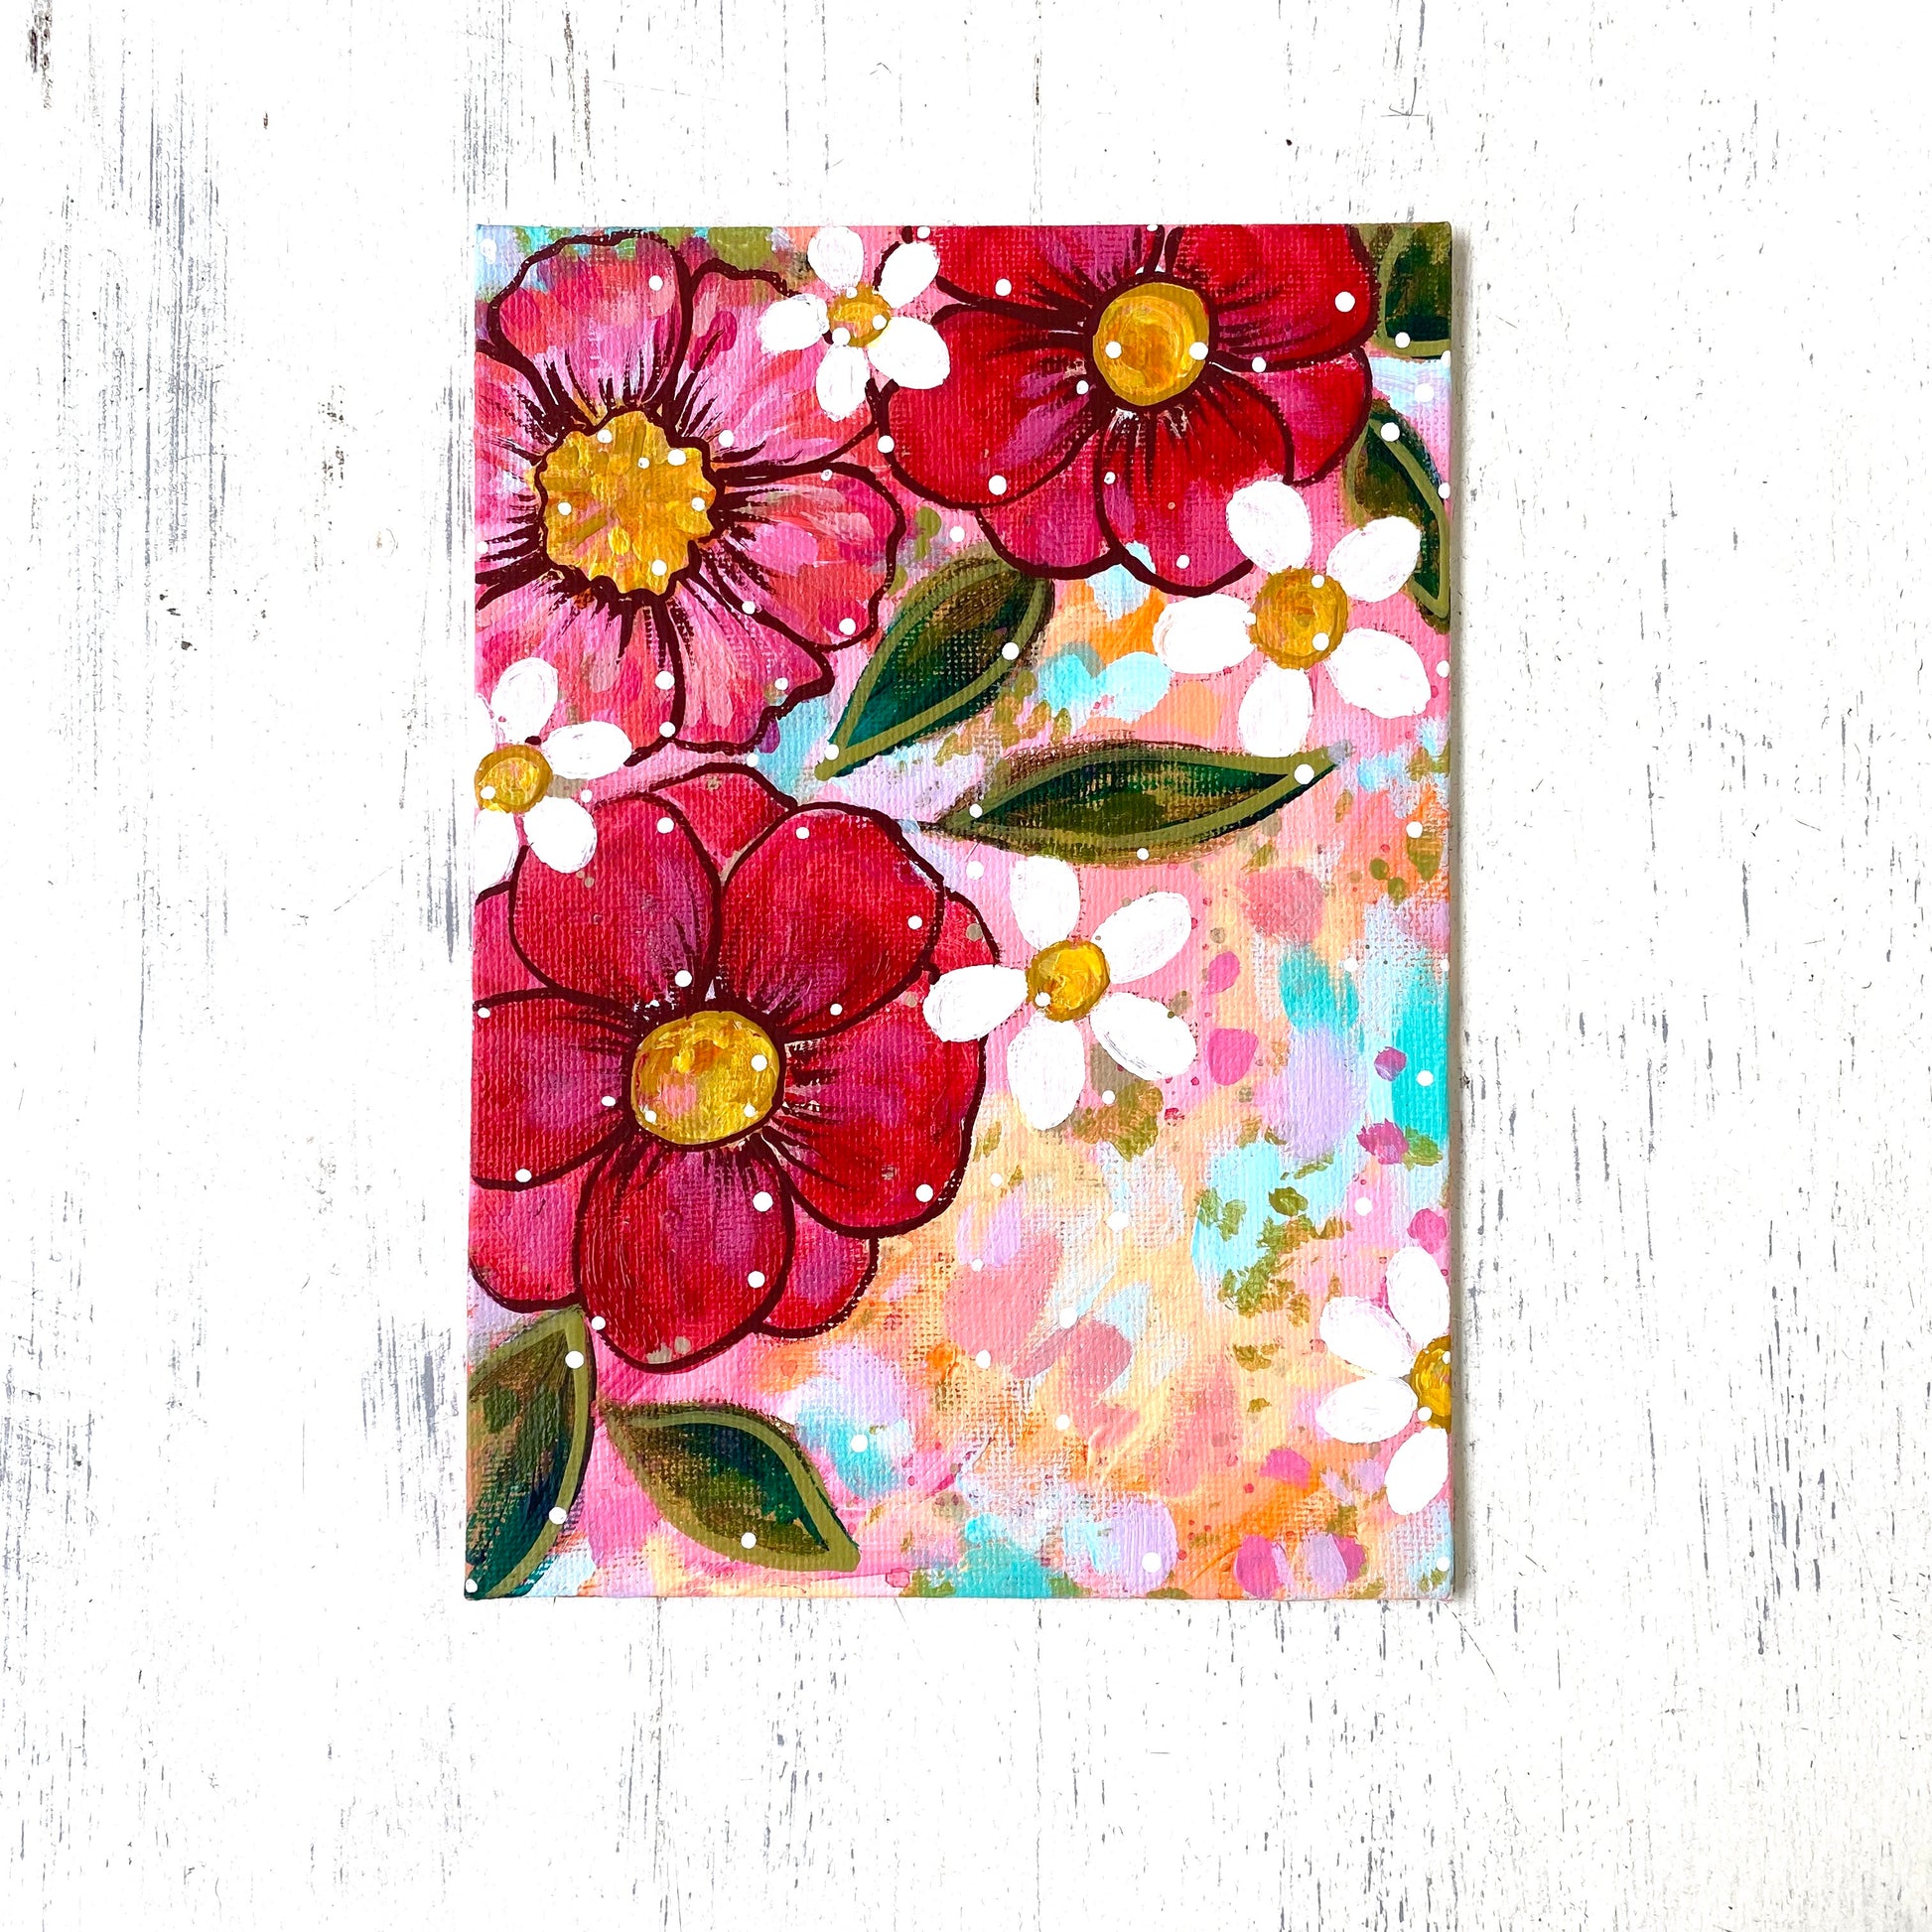 January Daily Painting Day 8 “A Heart Like a Wildflower” 5x7 inch Floral Original - Bethany Joy Art